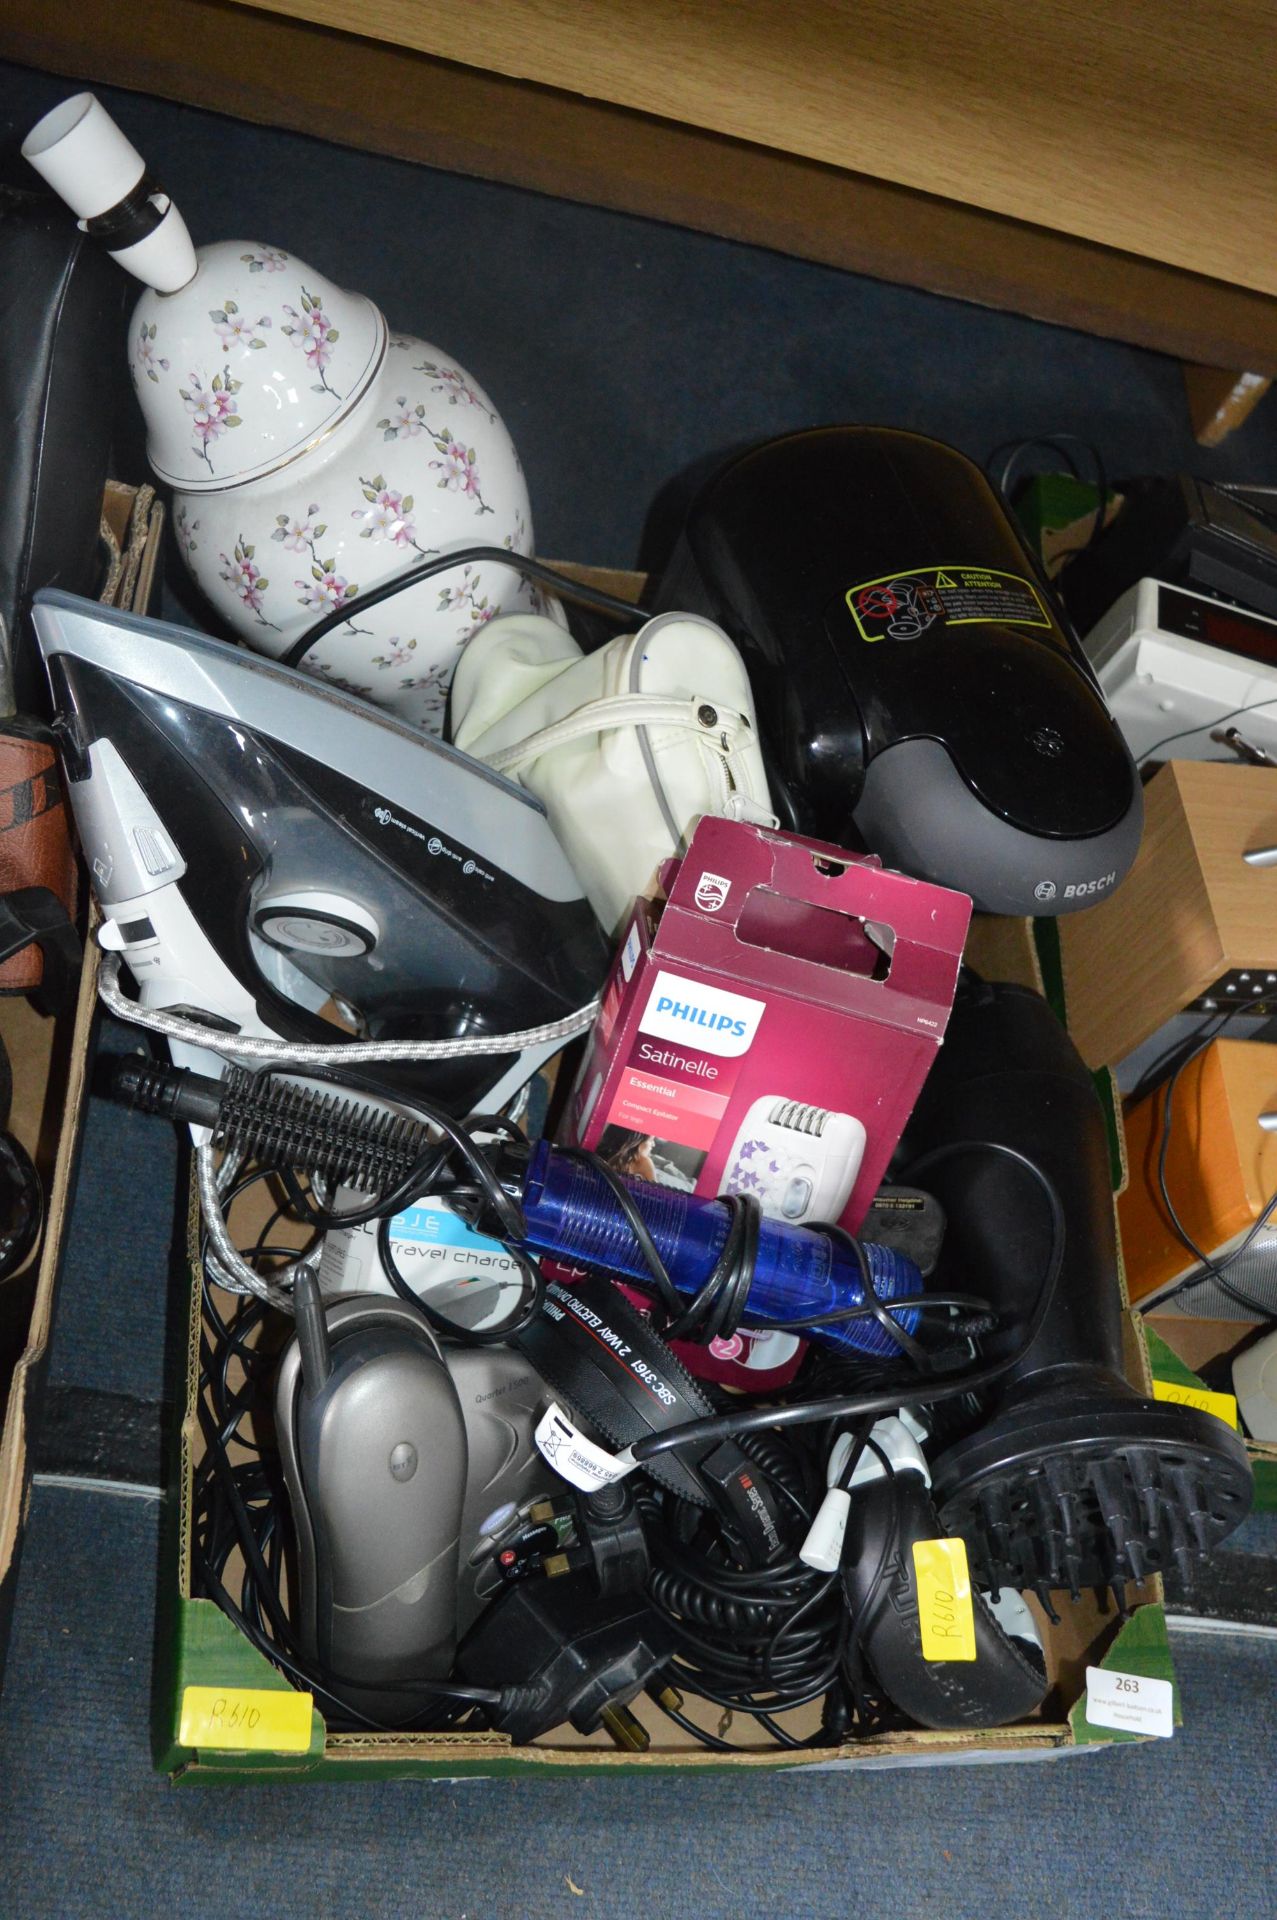 Electrical Items; Irons, Hair Styling Equipment, e